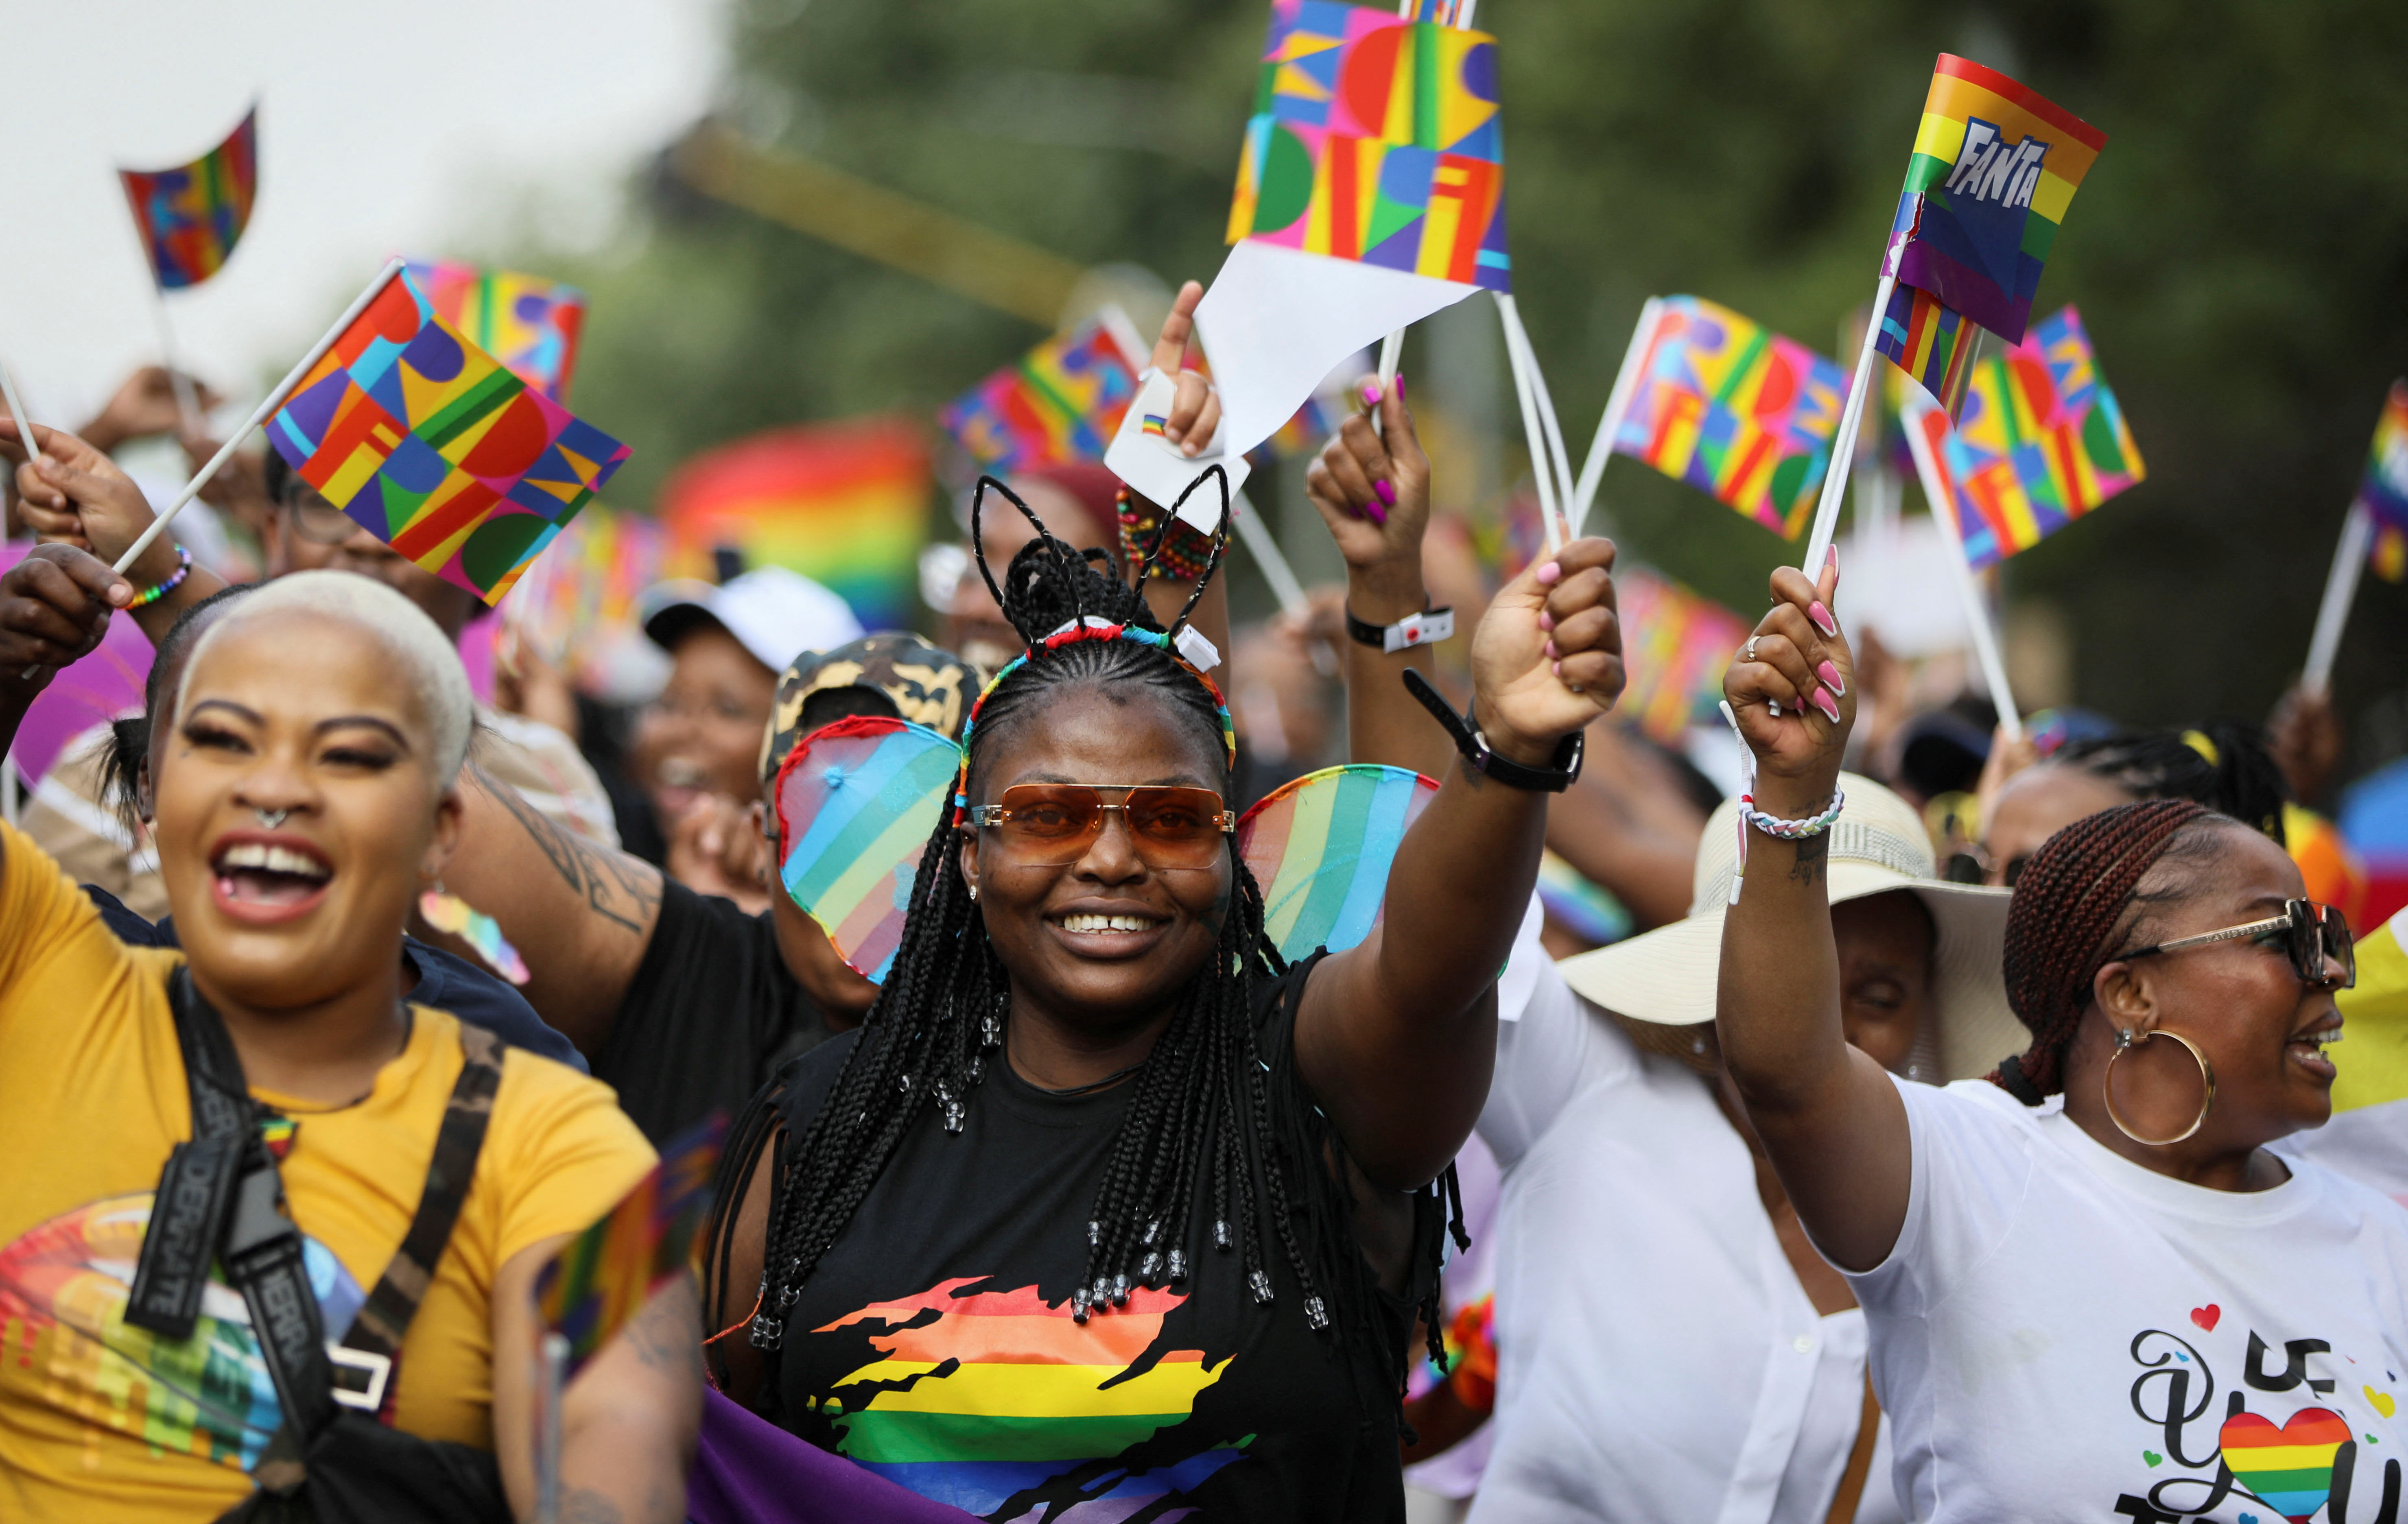 People march in celebration of LGBTQ+ rights at the annual Pride Parade in Johannesburg